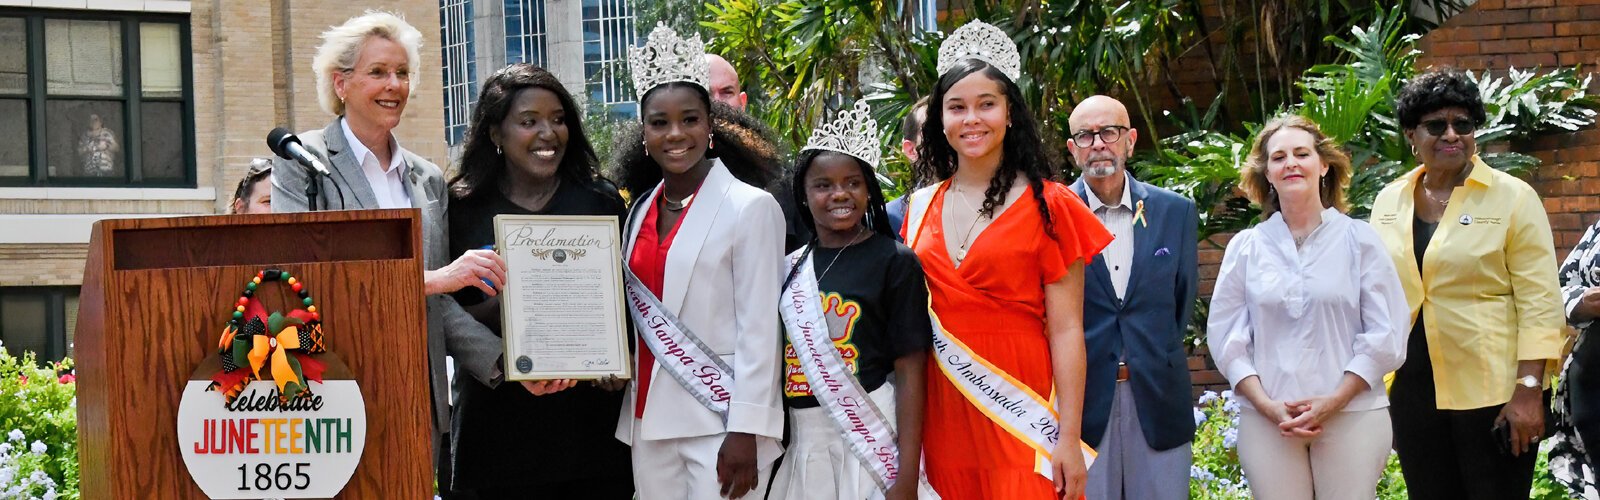 Tampa Mayor Jane Castor presents the “Juneteenth Awareness Day” proclamation to Pastor Philetha Tucker-Johnson, Miss Juneteenth Tampa Bay Jade Gordon, Little Miss Juneteenth Zoey Grace and Juneteenth Ambassador Jarielys Carmona, all of the Tampa Bay.